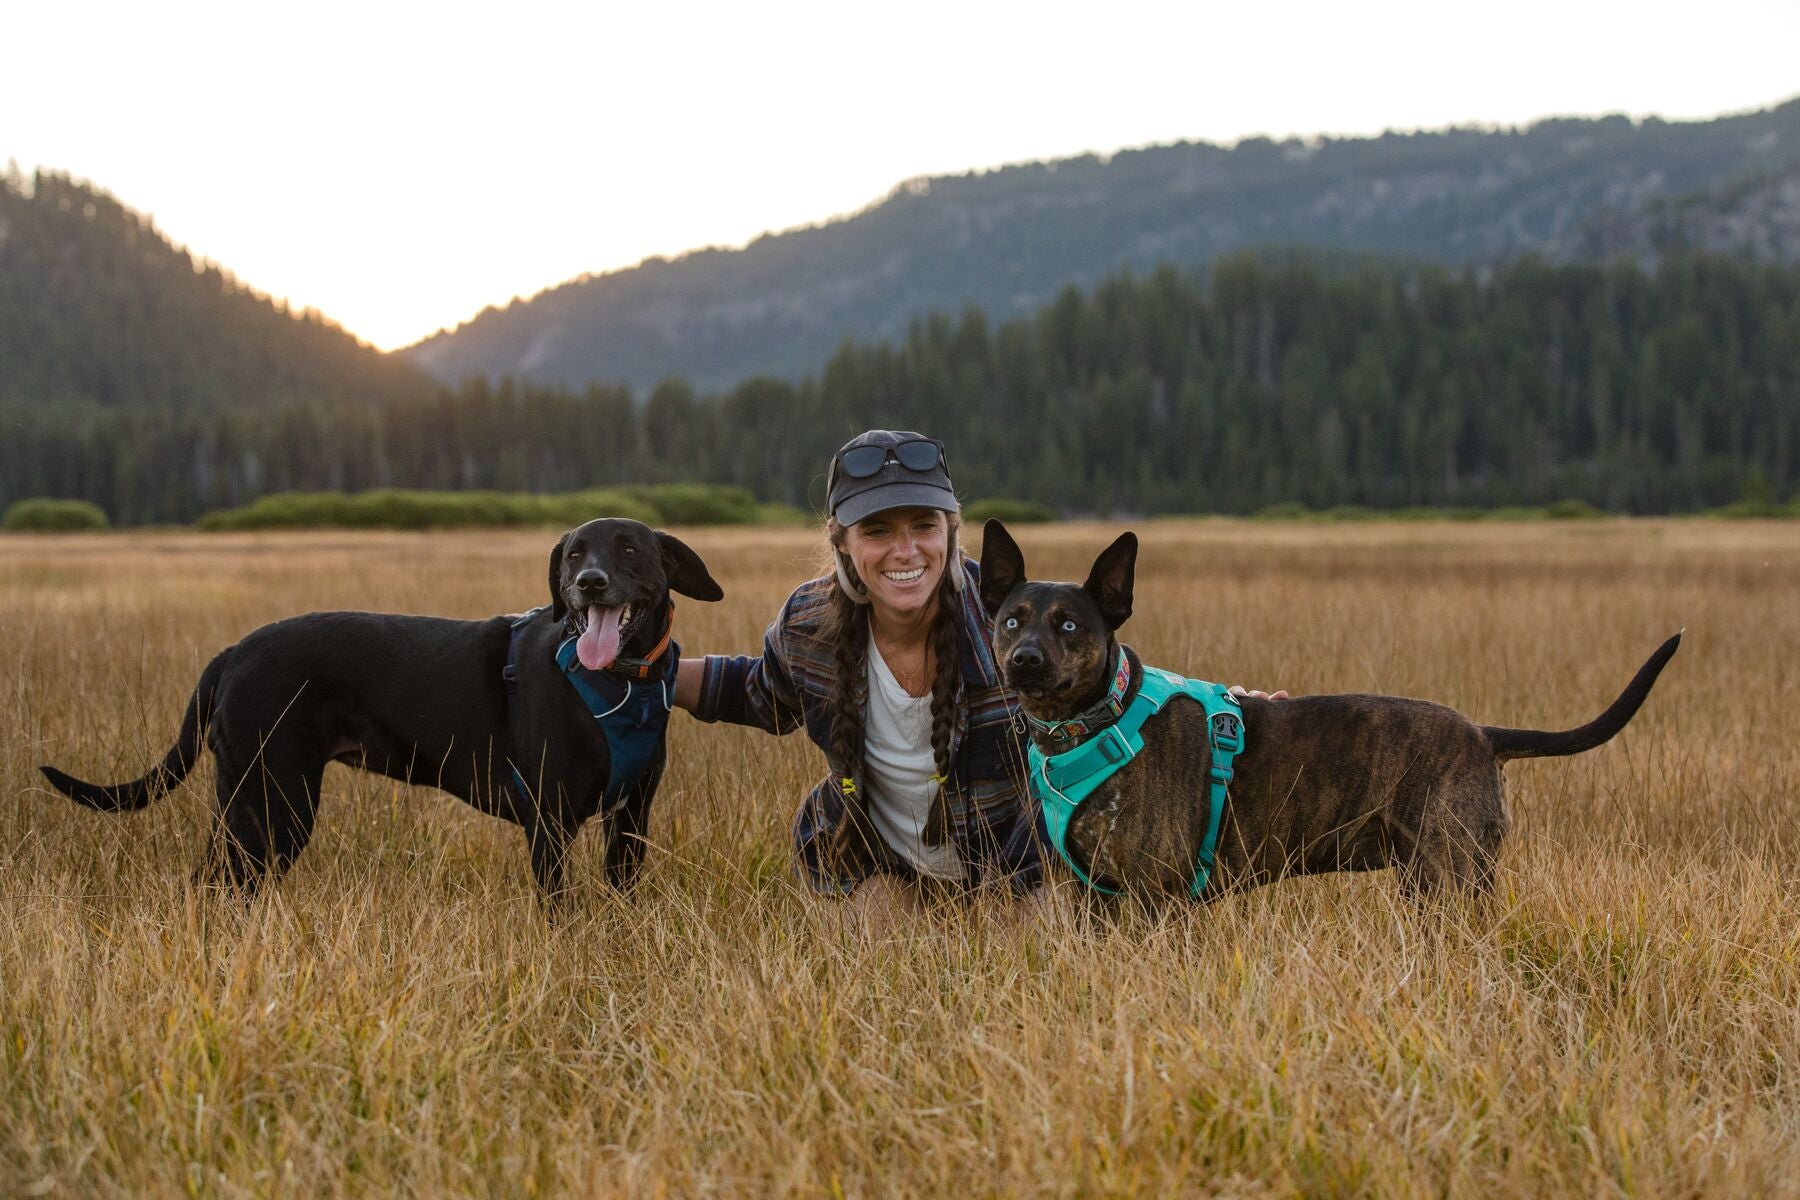 Dogs with front range harnesses pose next to woman in meadow.